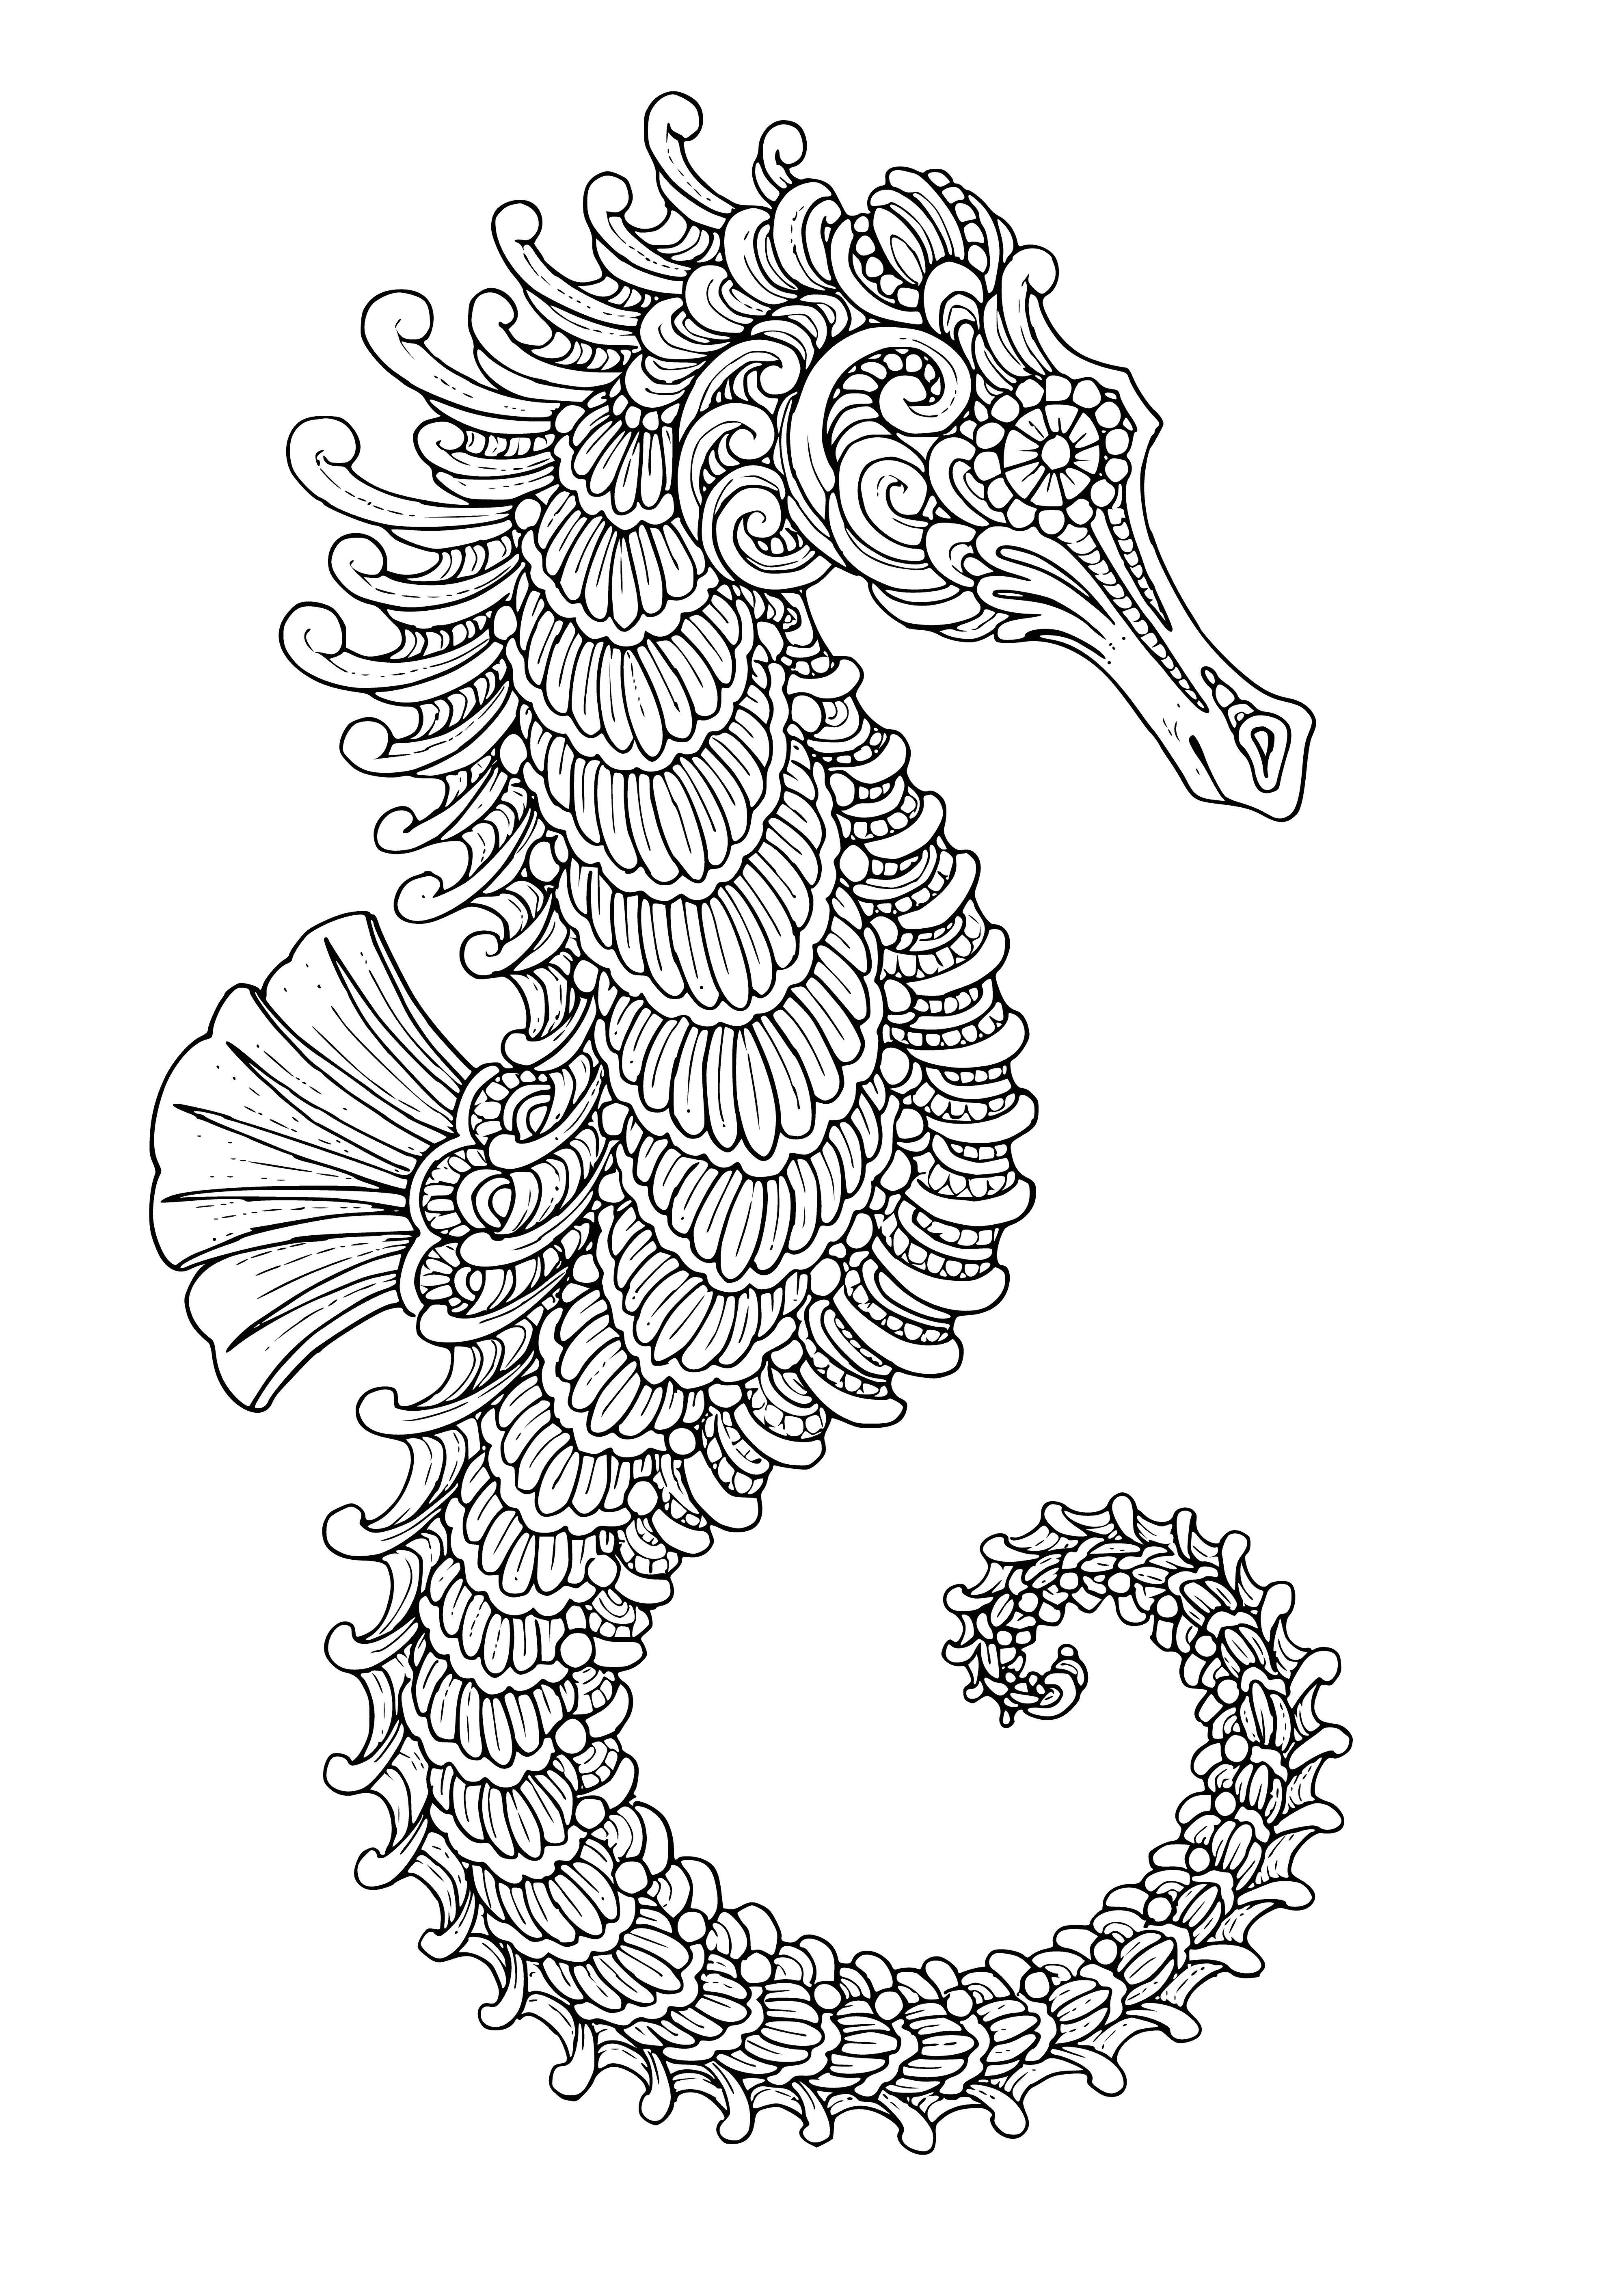 coloring page: A sea horse surrounded by marine life and small waves, ready to be colored! #coloringpages #seahorse